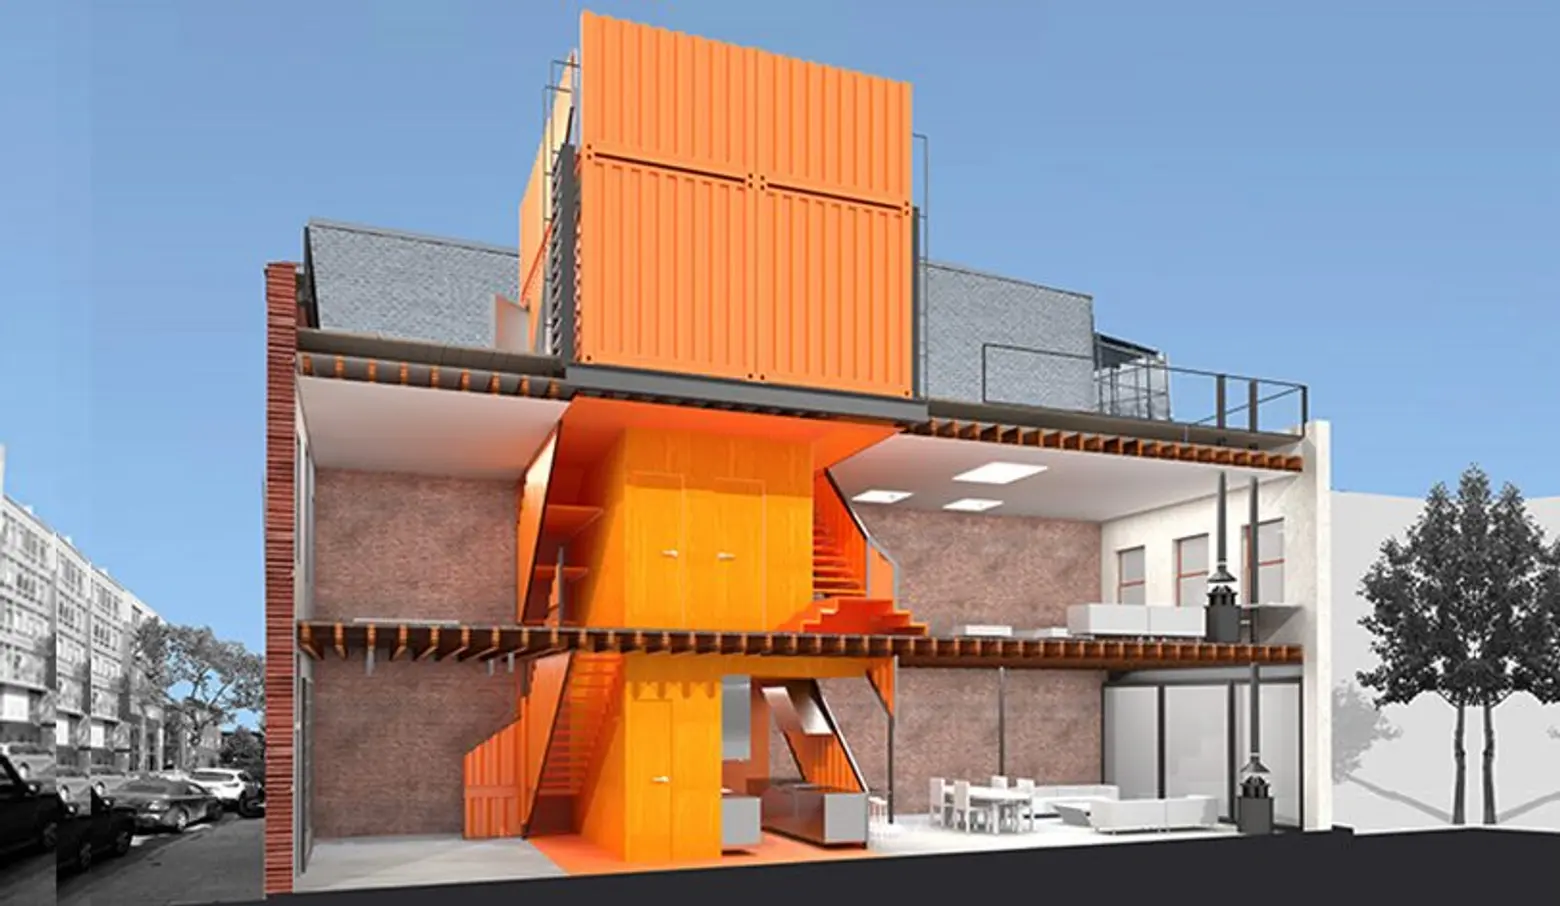 LOT-EK shipping container brooklyn carraige house, shipping container architecture, lot-ek, lot-ek nyc